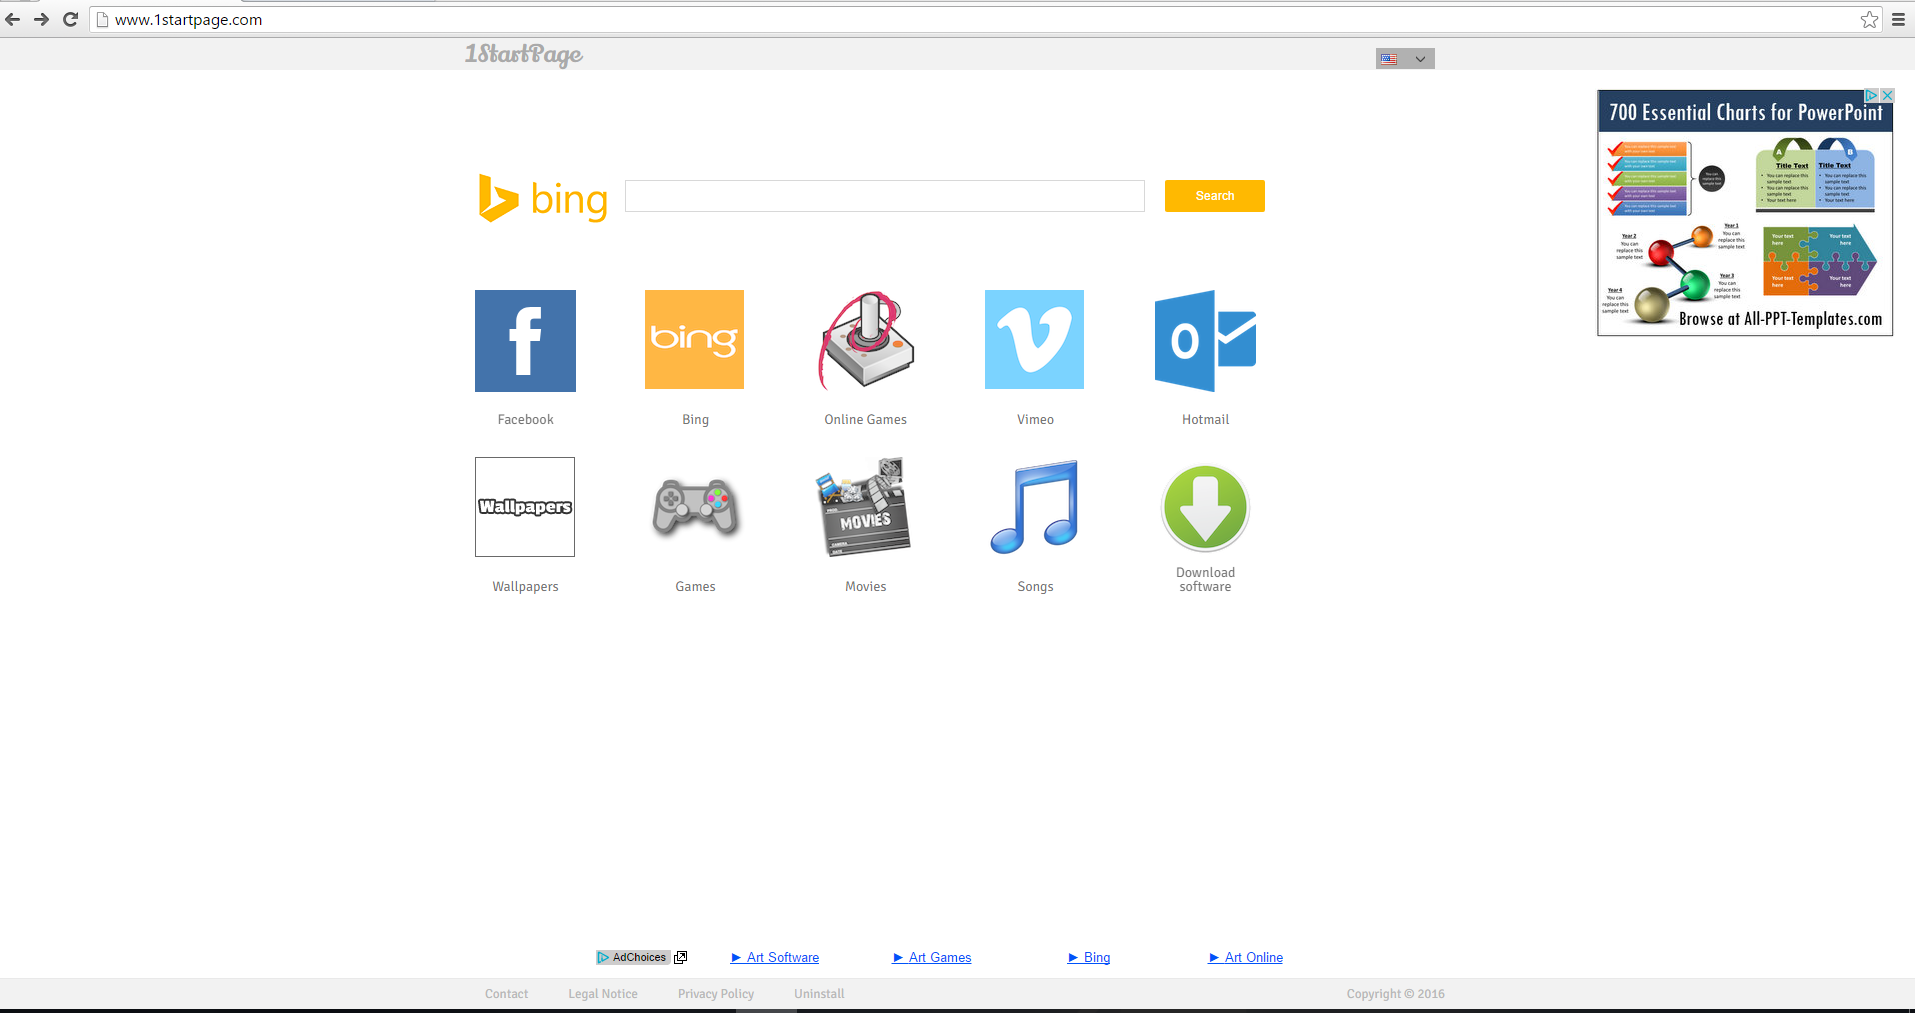 1startpage-homepage-search-engine-bestsecuritysearch